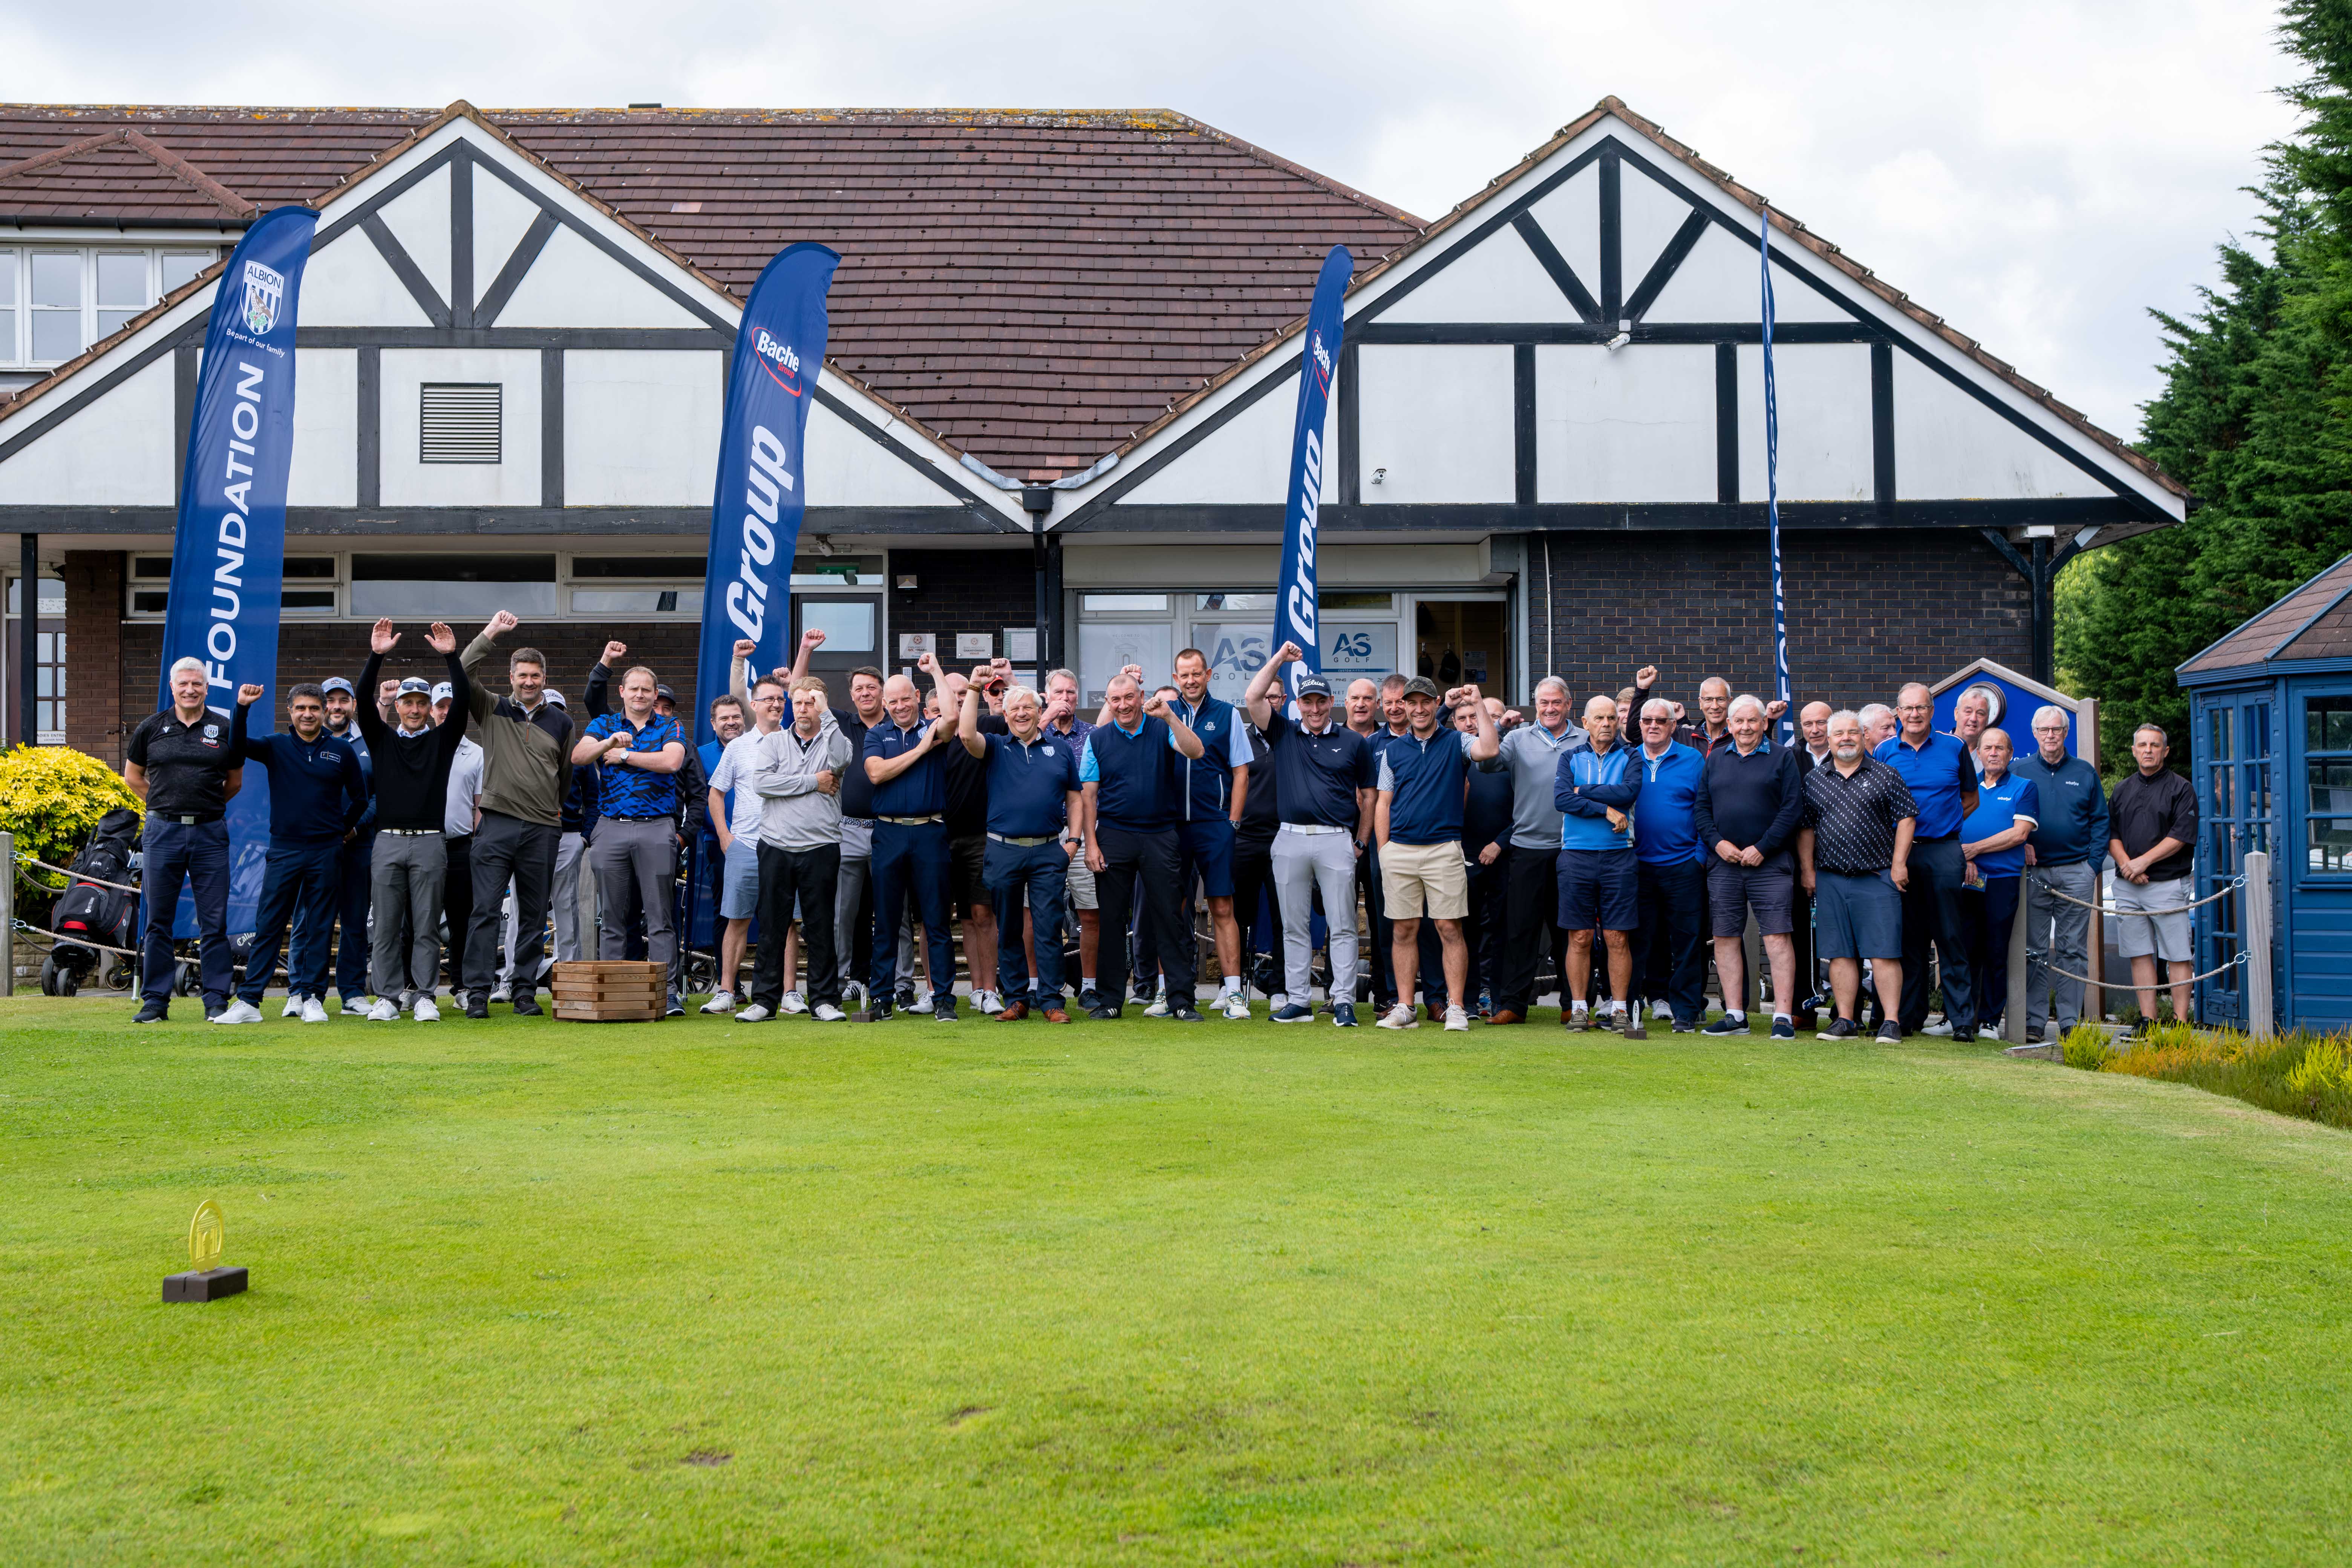 The Albion Foundation Golf Day players get set for a day on the course.